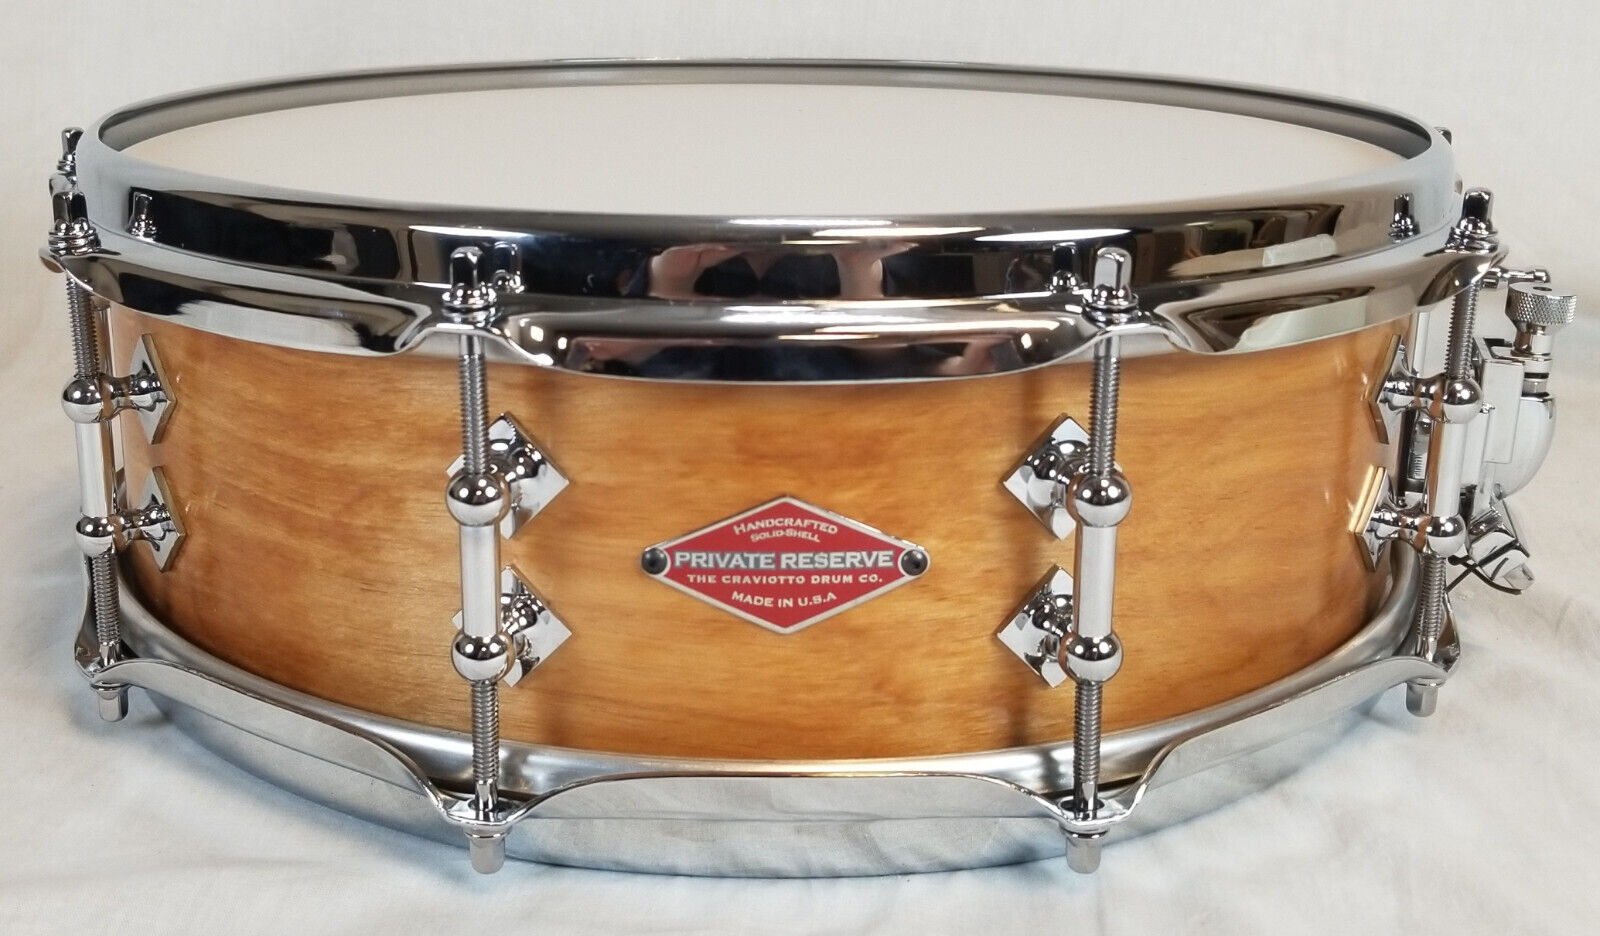 Craviotto Private Reserve Timeless Timber Birch 4.5″X14″ Snare Drum, #2 of 2, SS 2